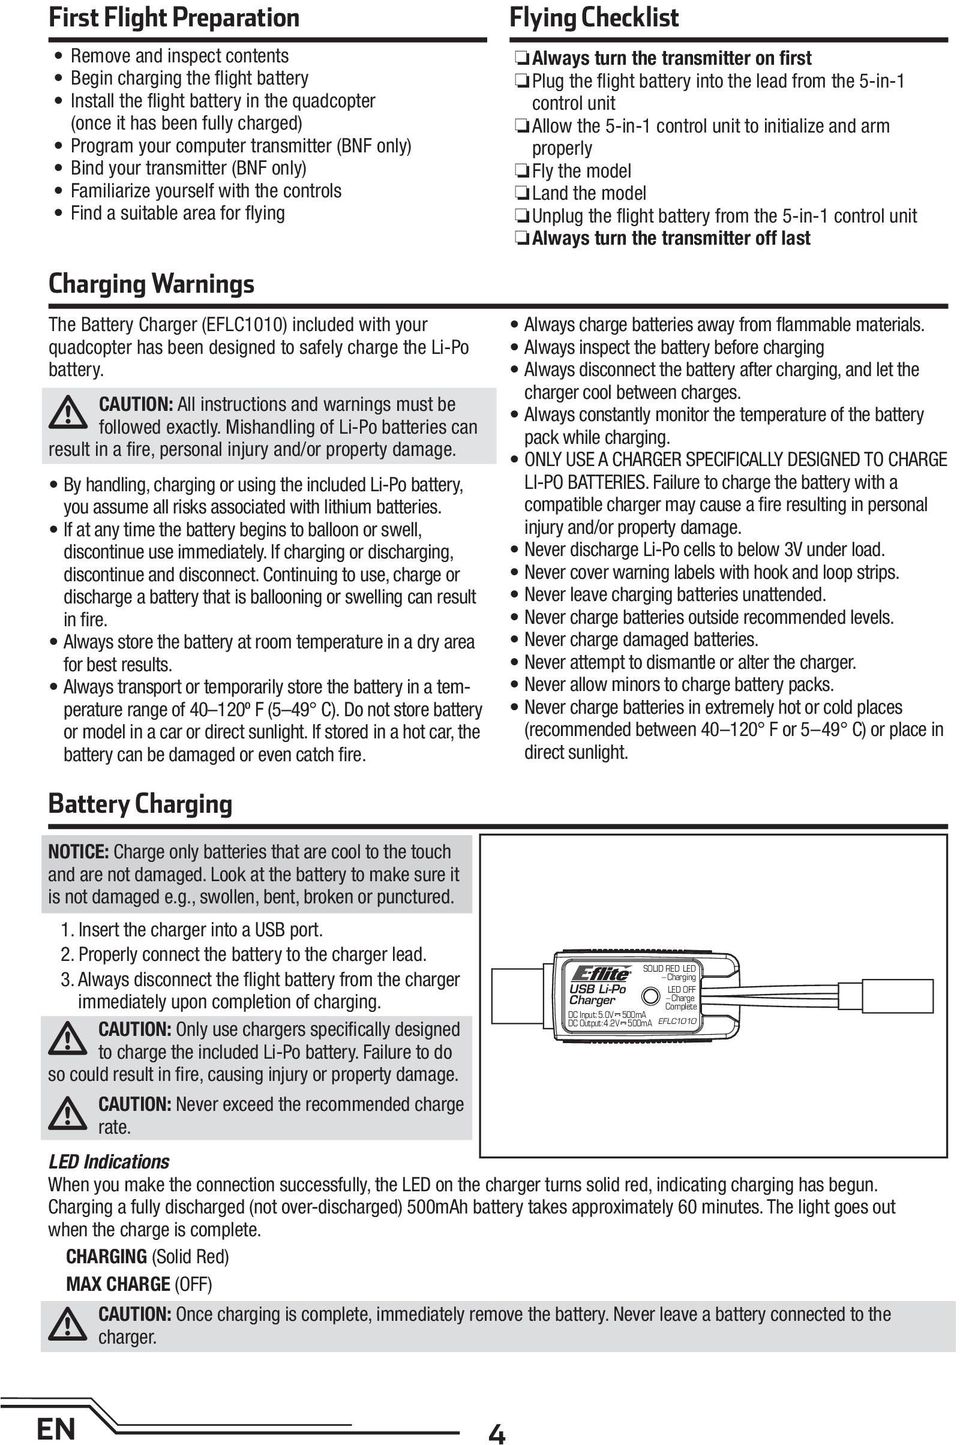 quadcopter has been designed to safely charge the Li-Po battery. CAUTION: All instructions and warnings must be followed exactly.